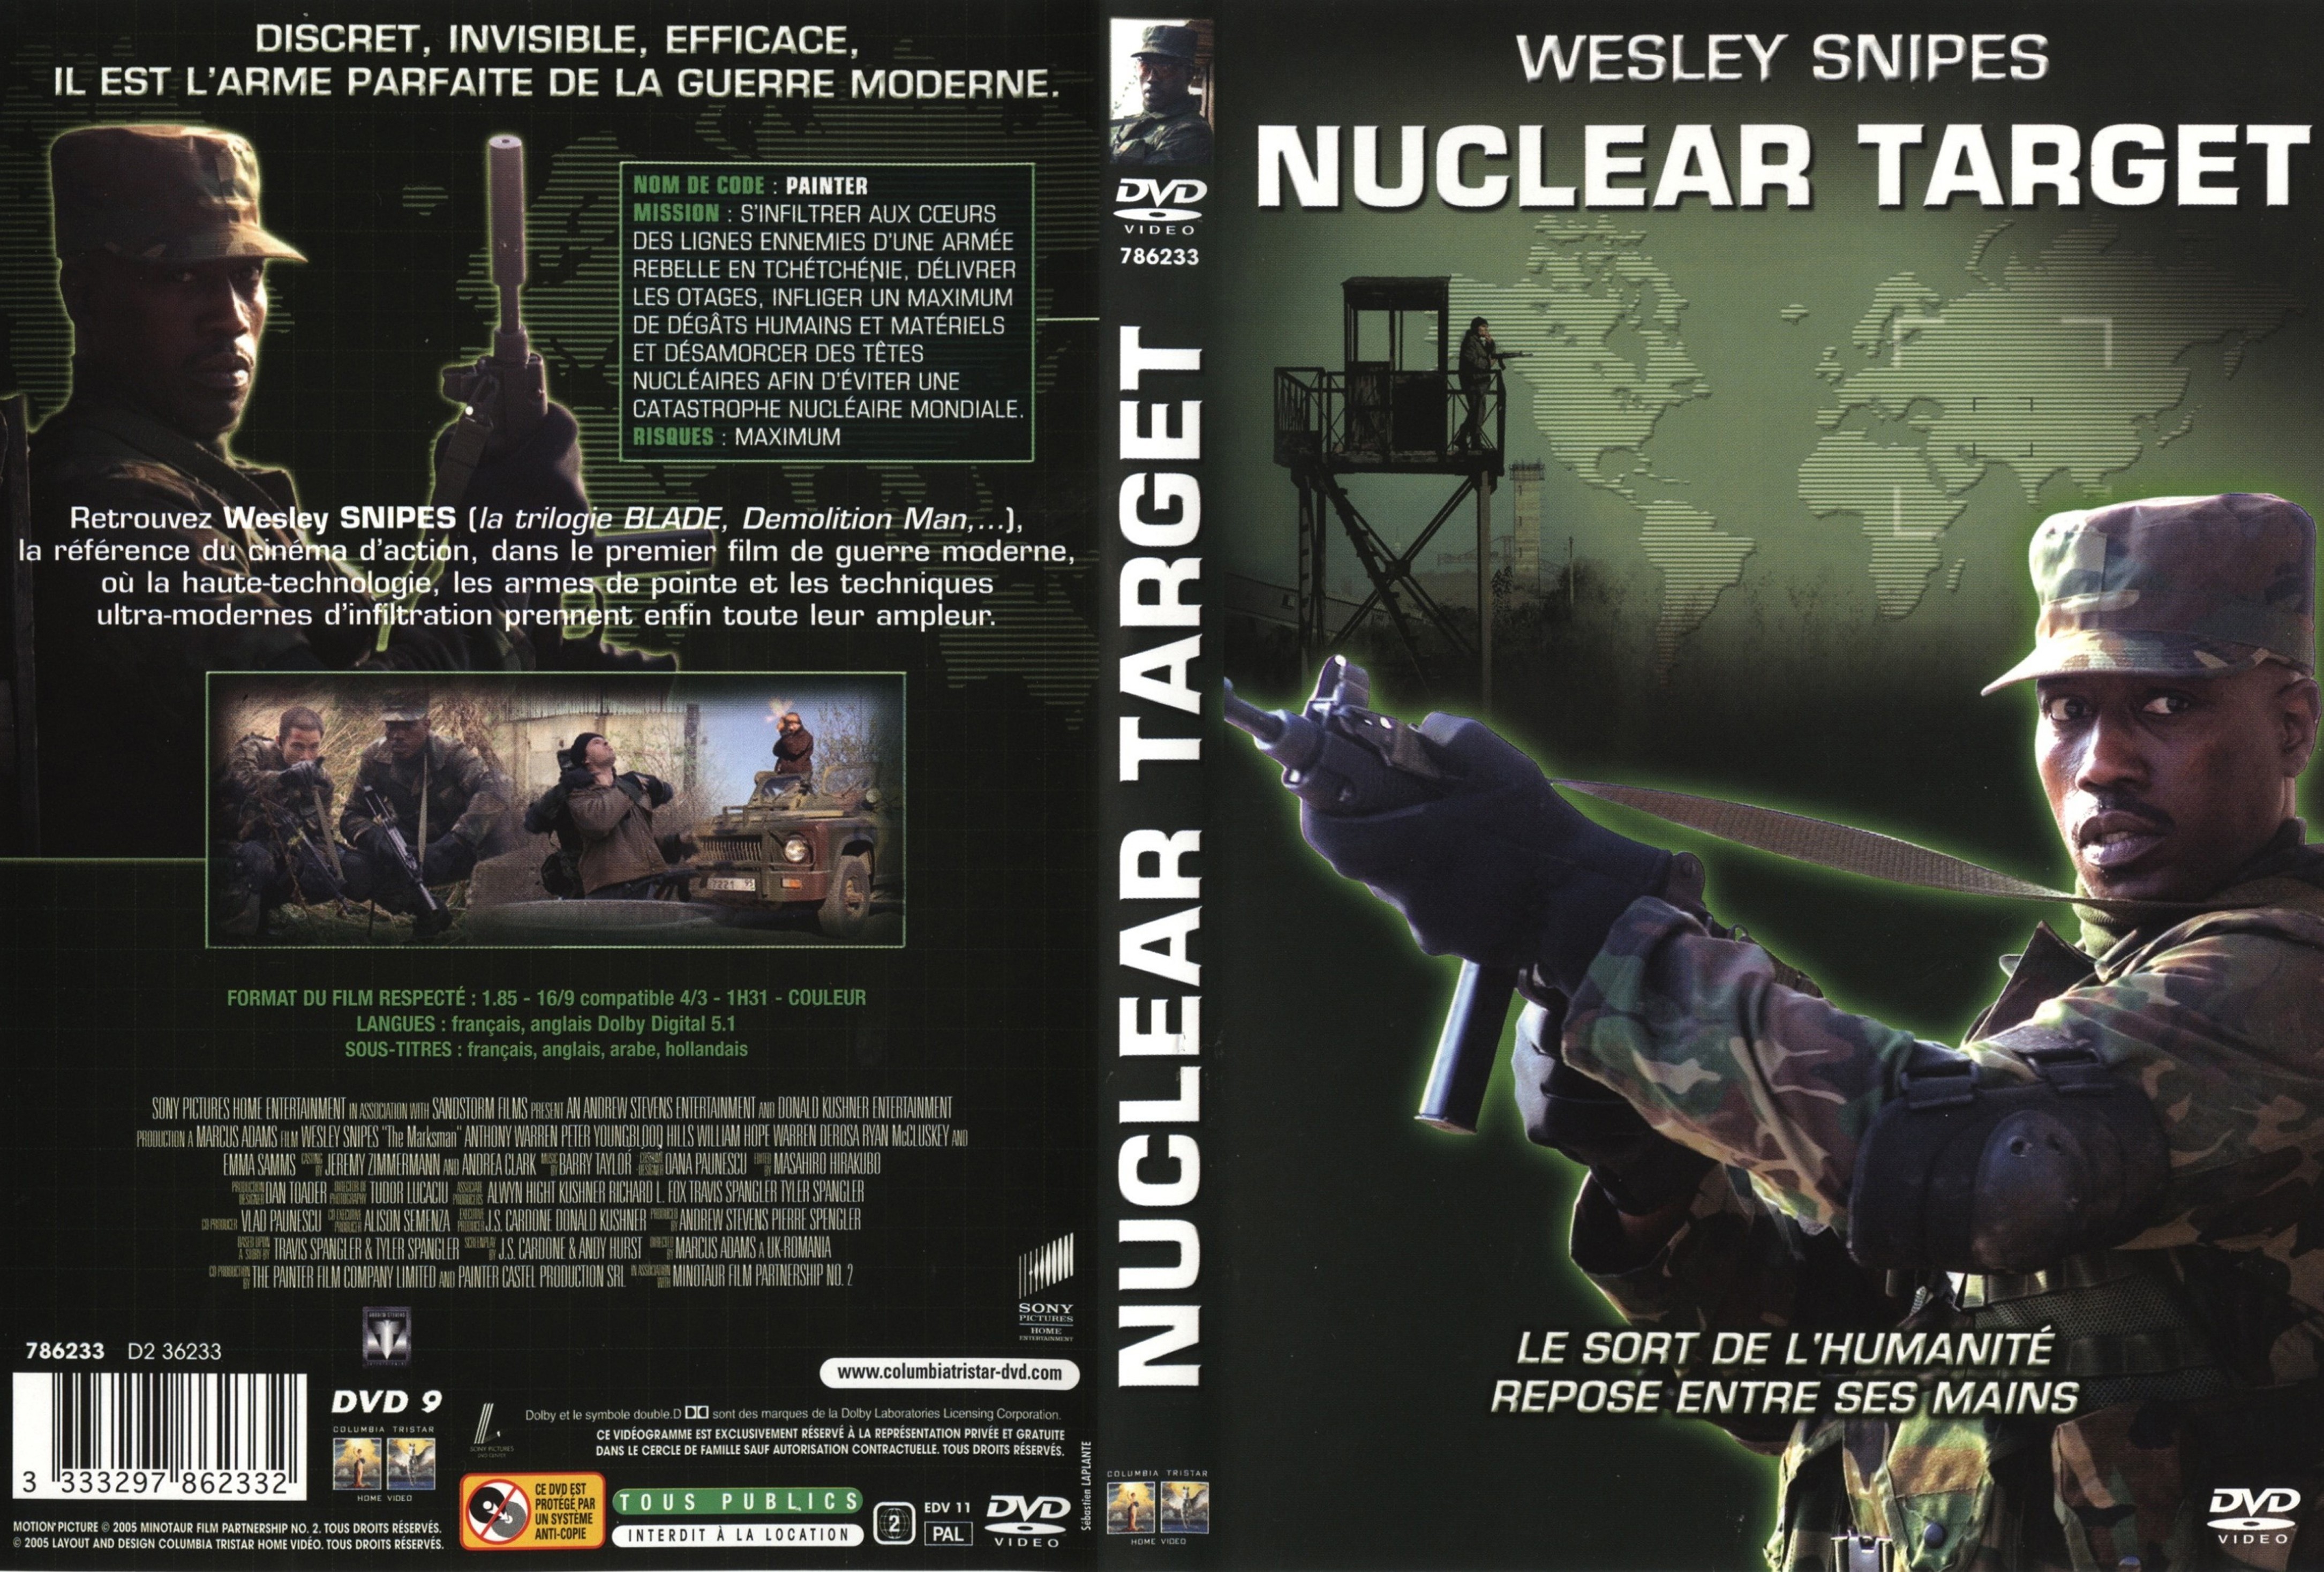 Jaquette DVD Nuclear target